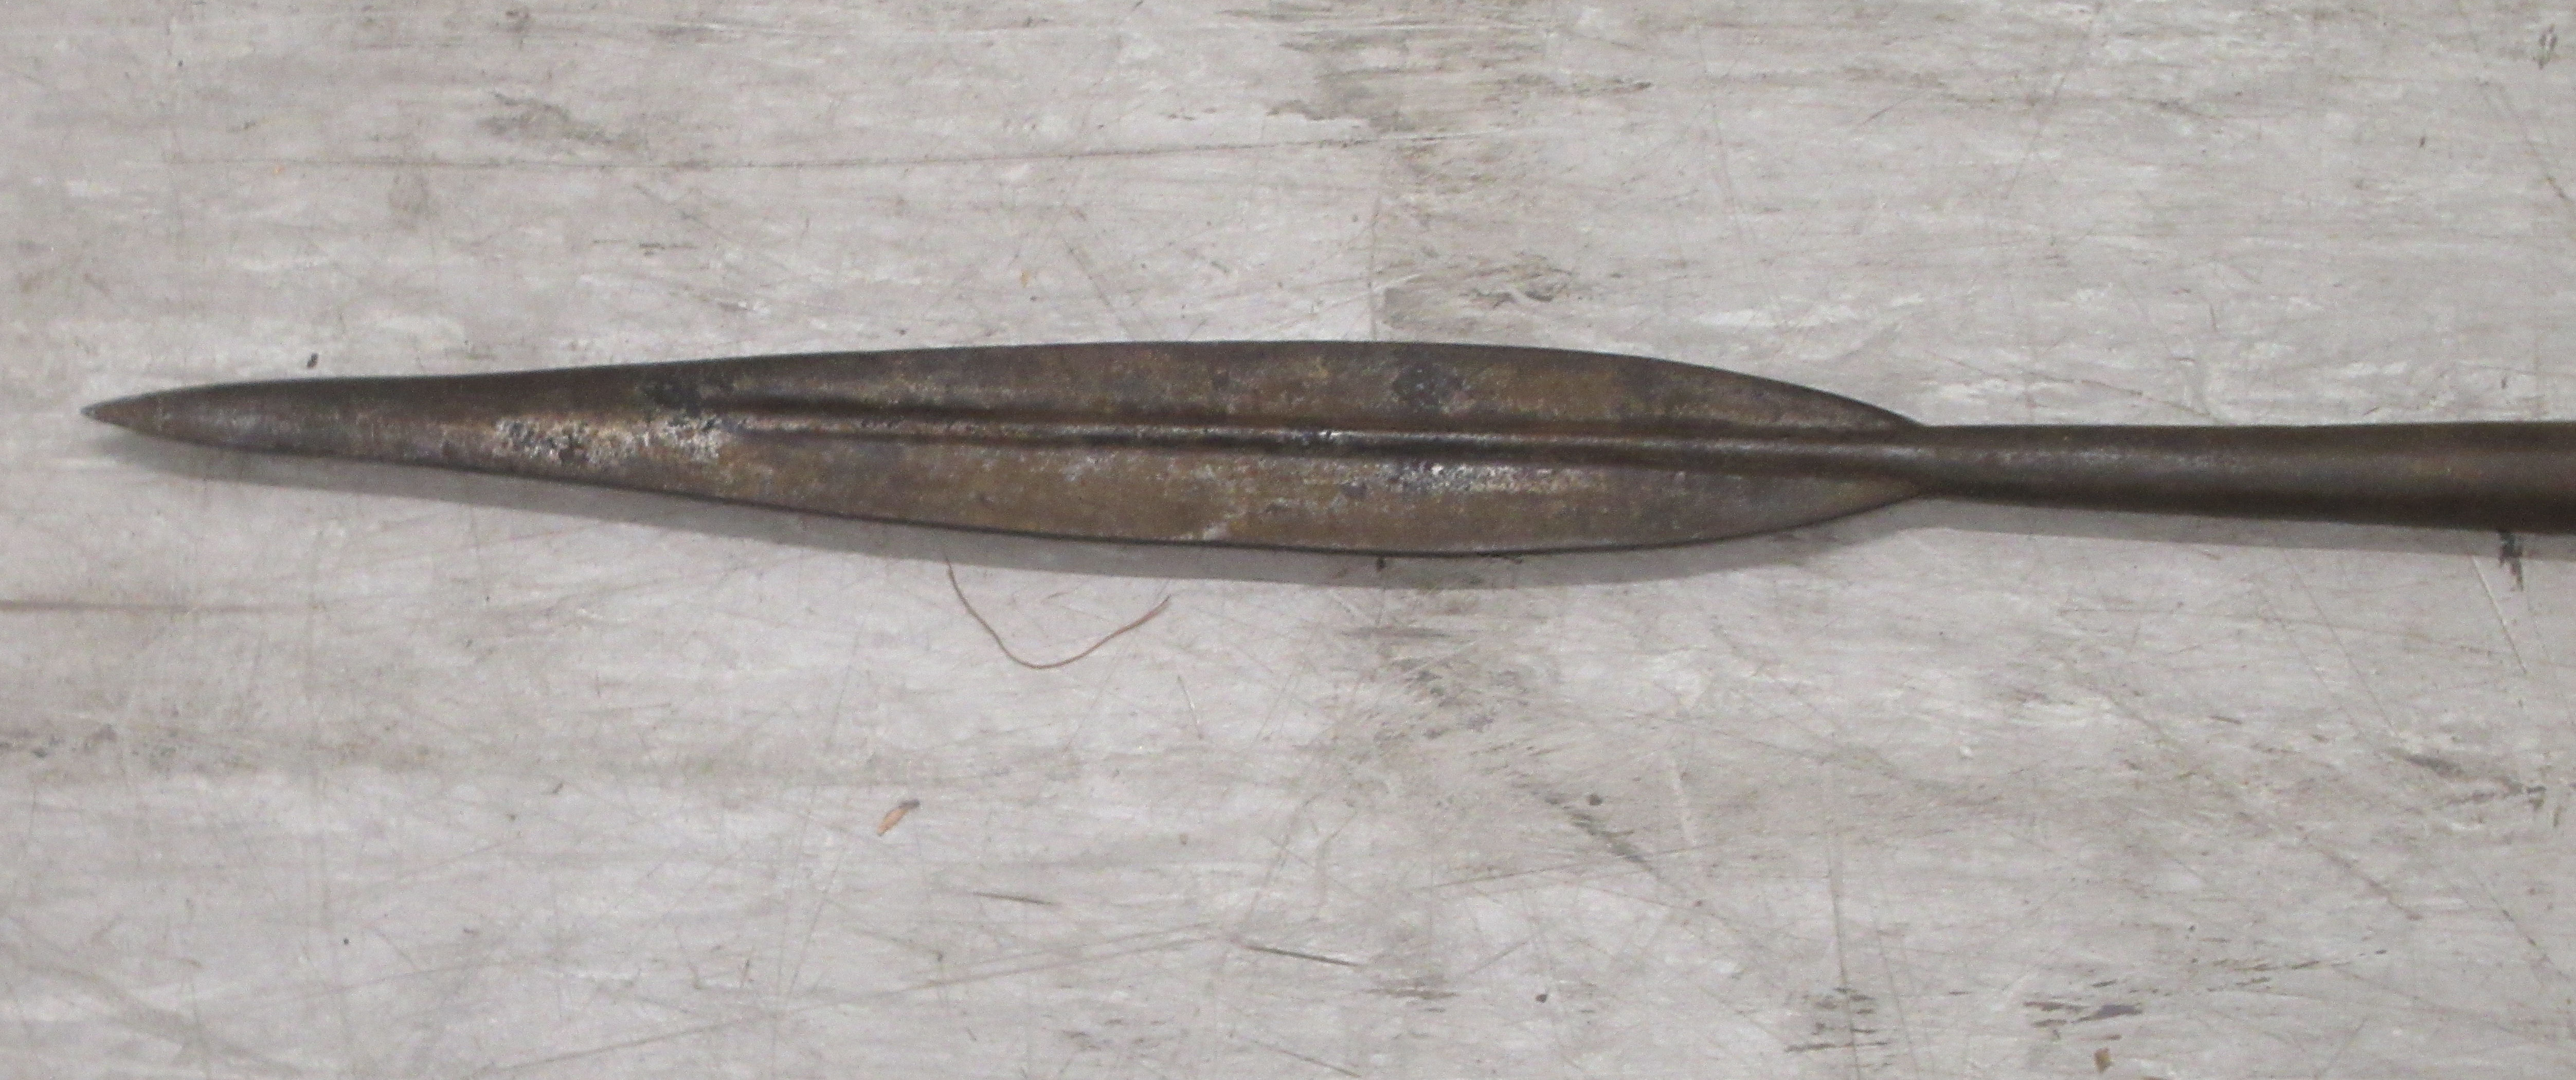 A late 19thC African Maasai spear with a leaf blade and a hair wrapped shaft  86"L - Image 2 of 7